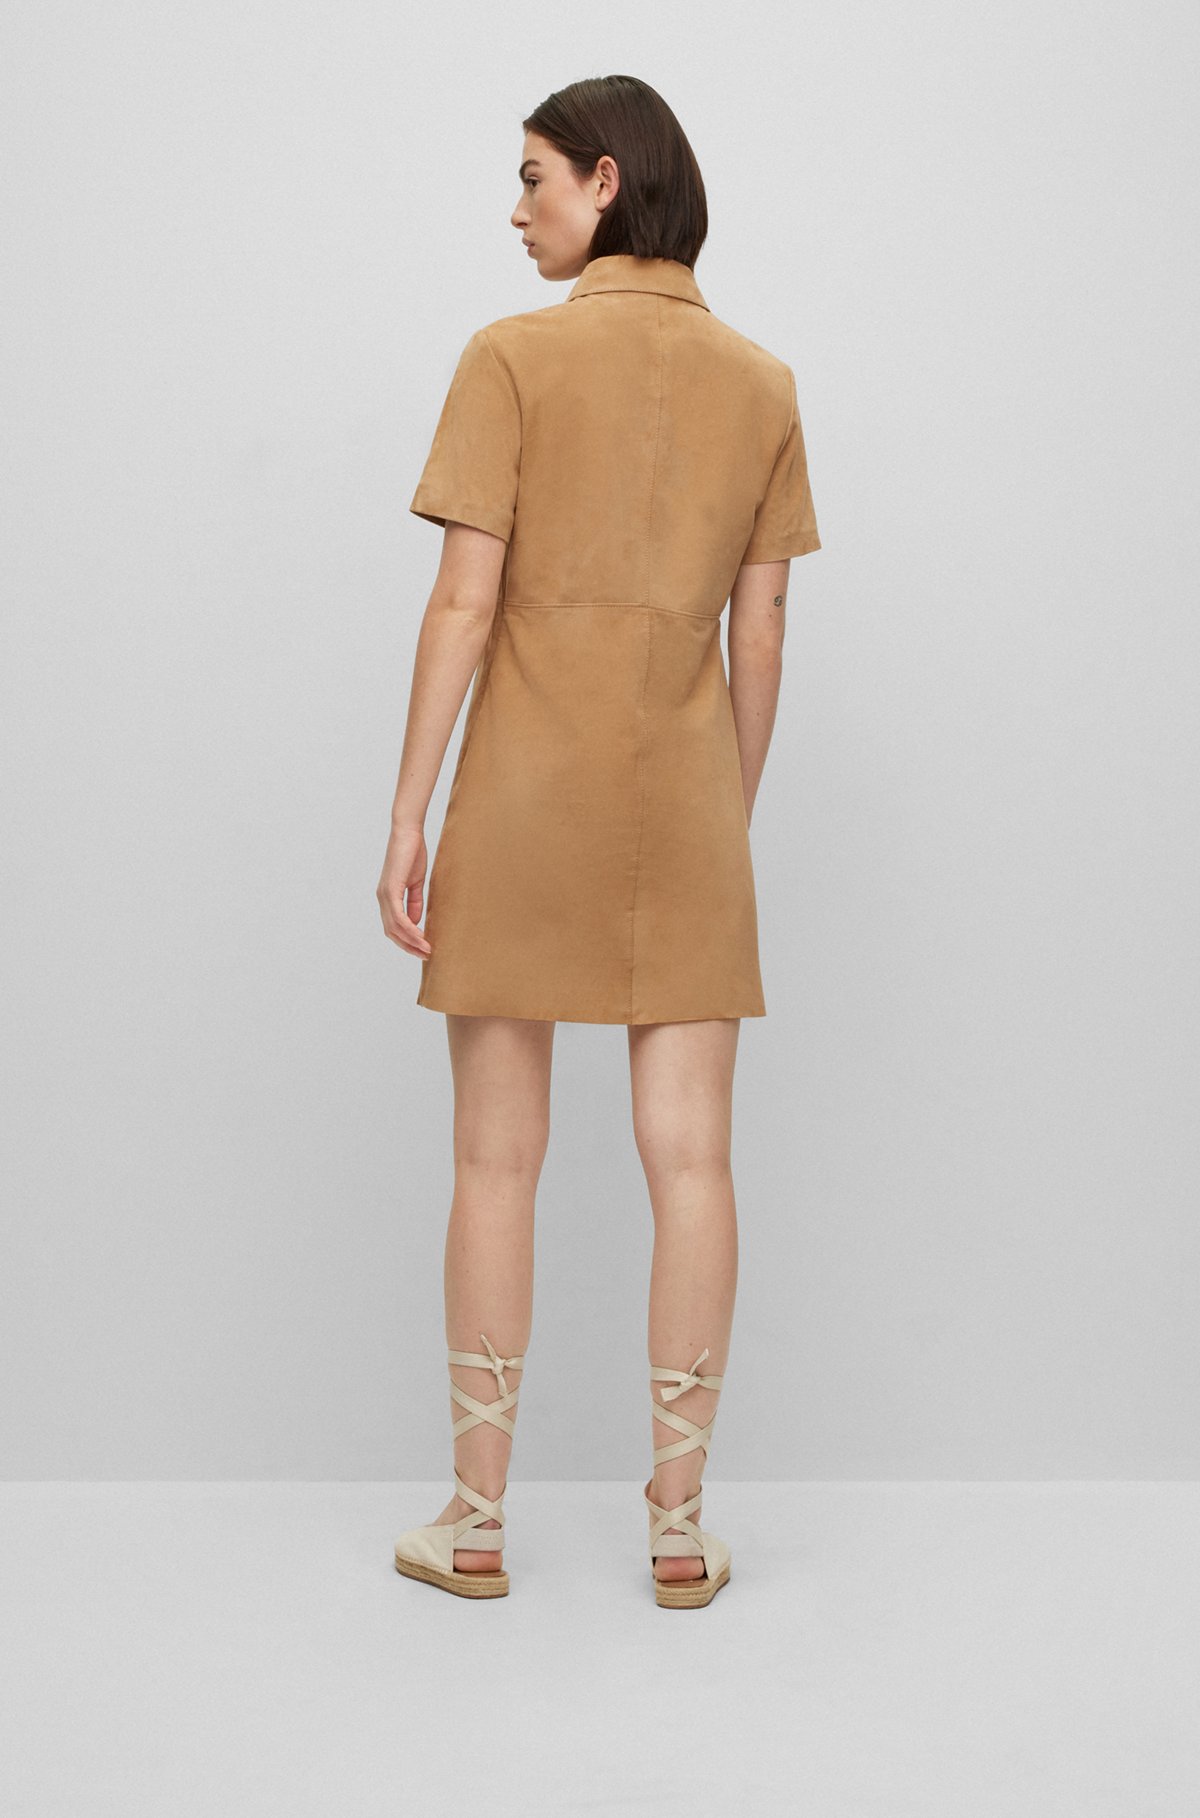 Slim-fit shift dress in suede with frill detail, Light Beige